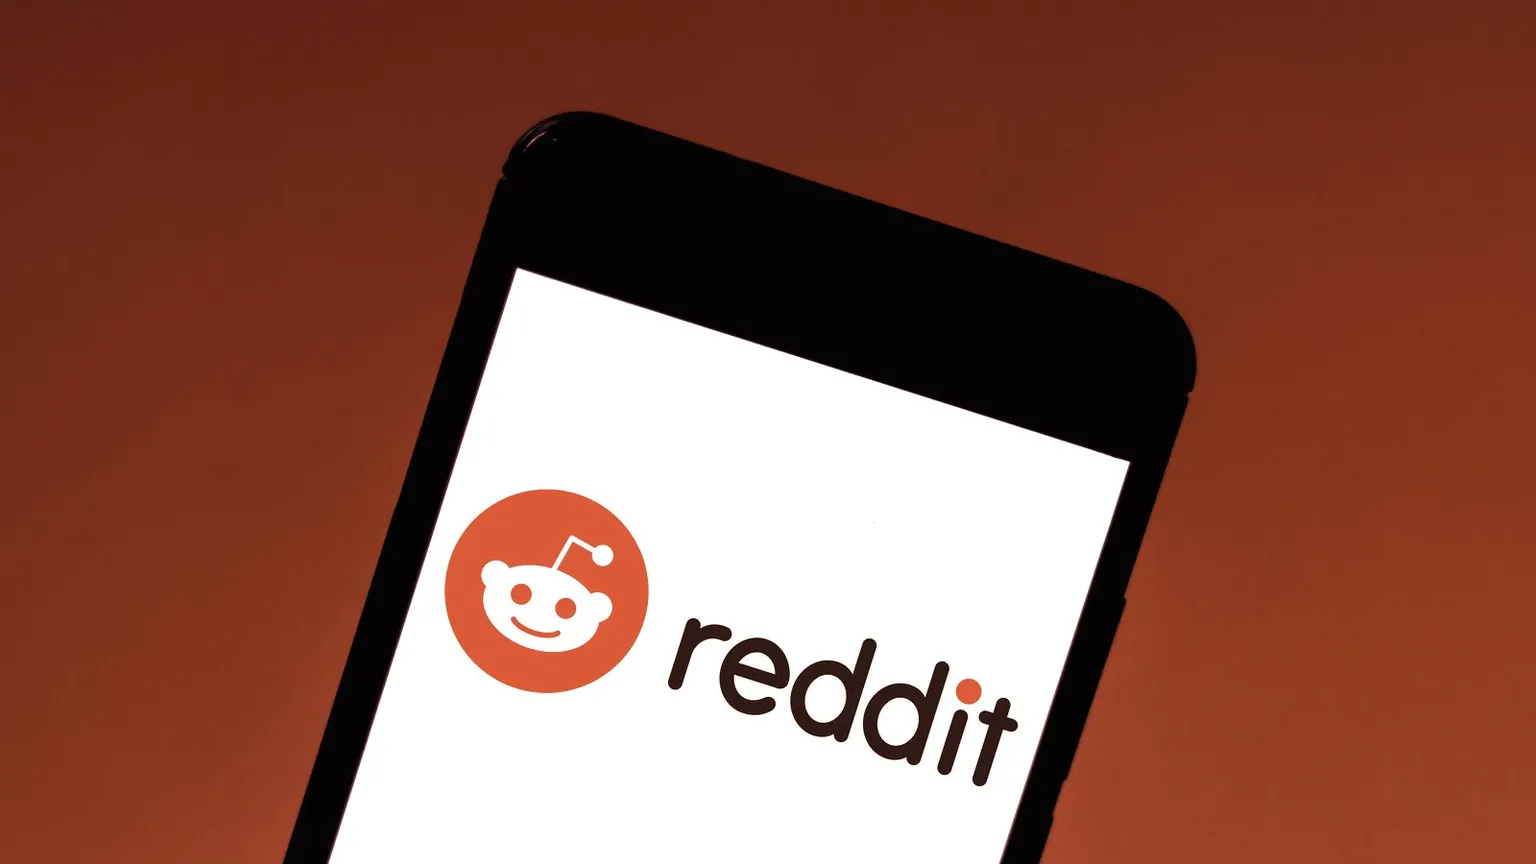 Reddit is the seventh-most-visited site in the US. Image: Shutterstock